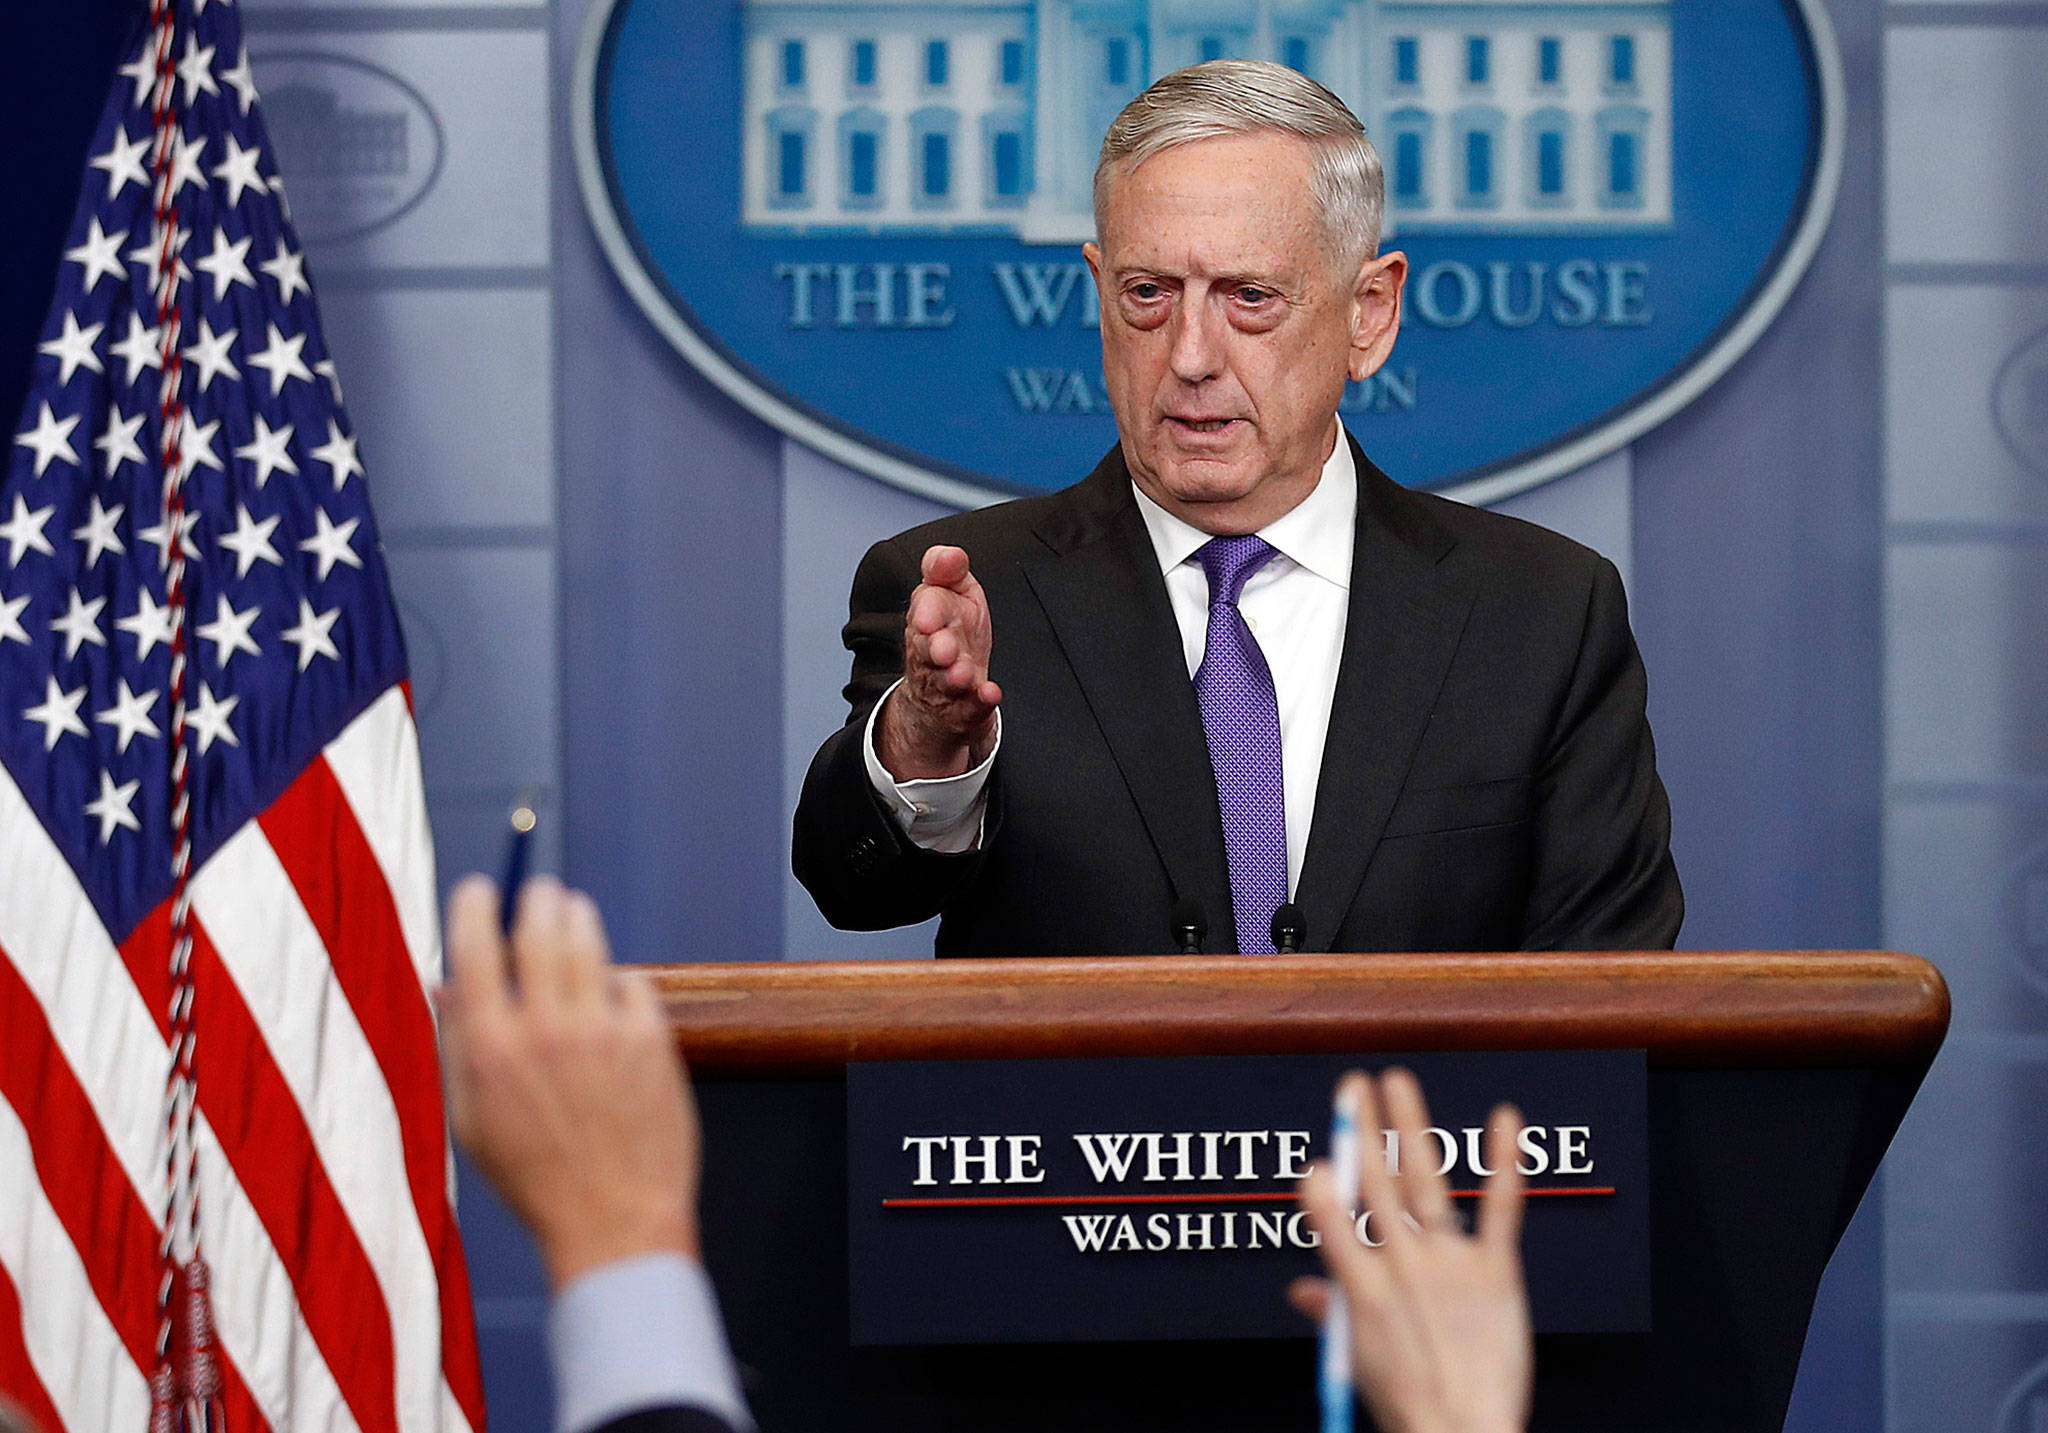 Defense Secretary Jim Mattis takes questions during the daily news briefing at the White House on Wednesday. (AP Photo/Carolyn Kaster)